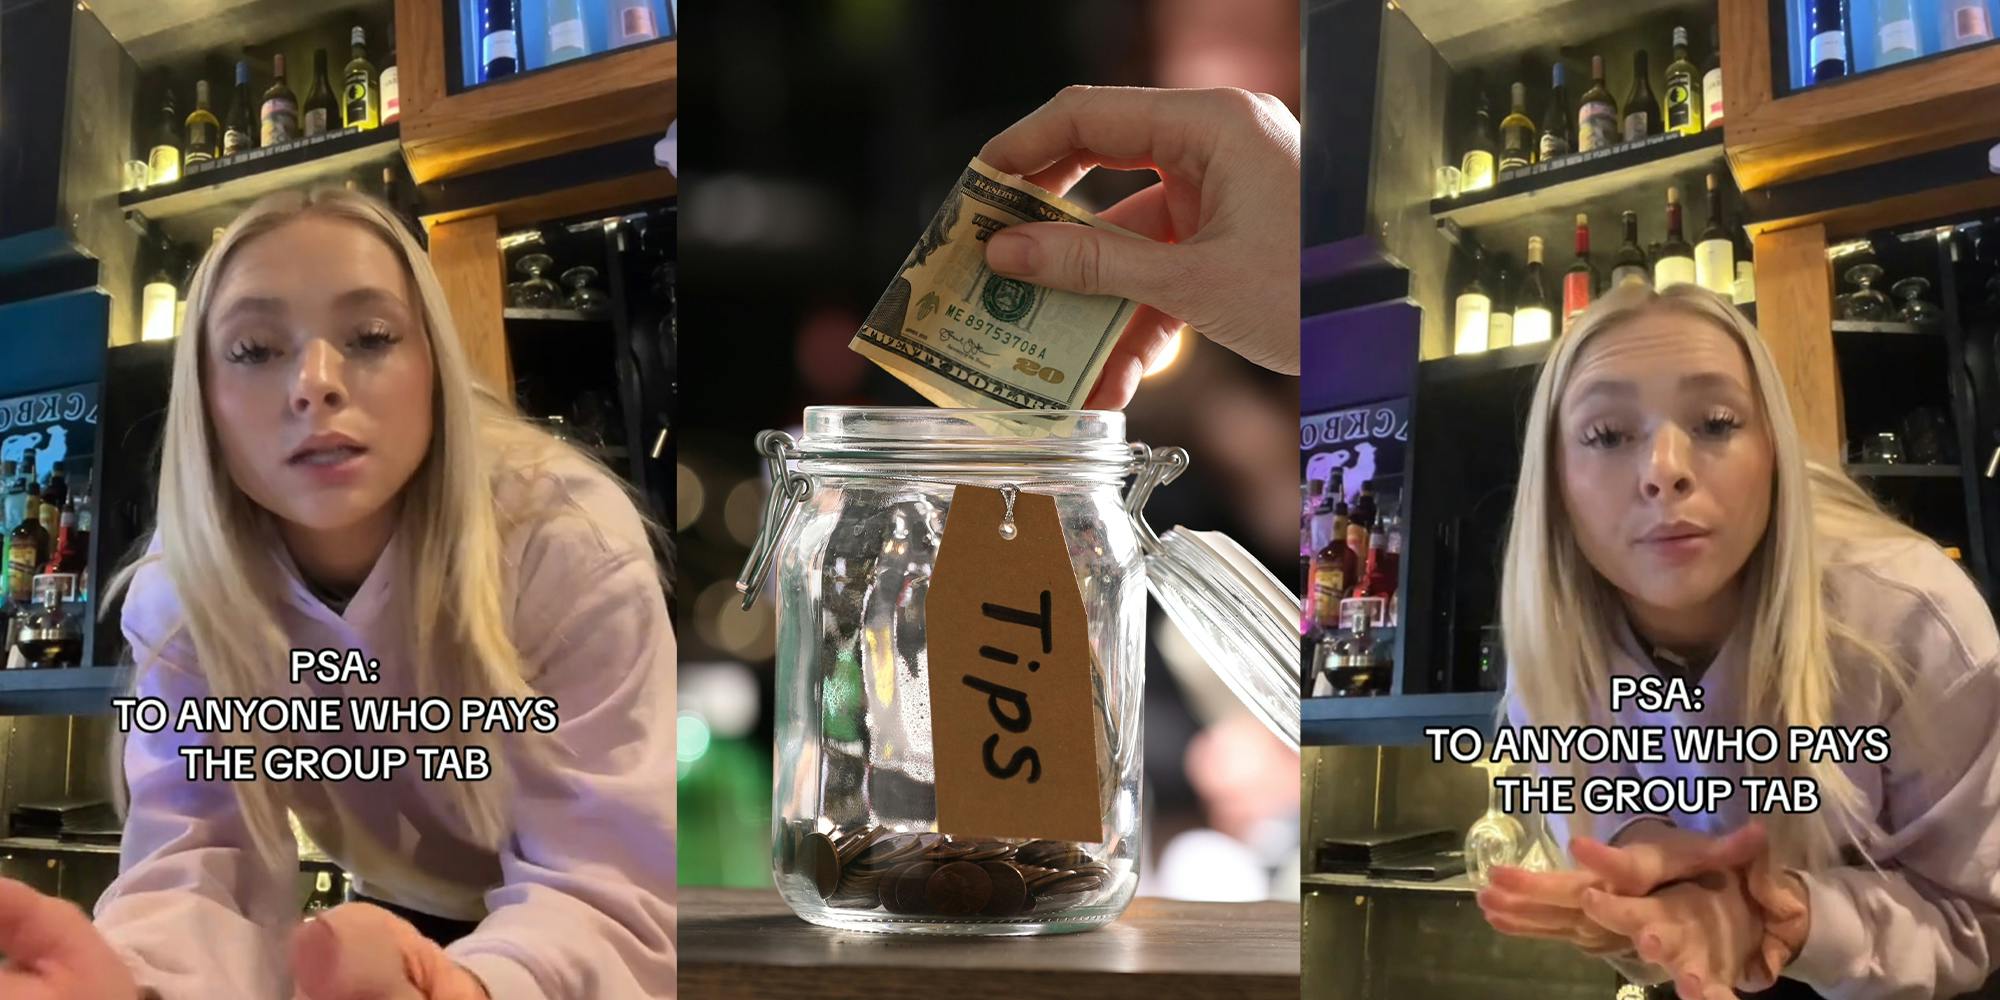 Bartender shares PSA to customers who insist on paying group tab, but leave bad tip